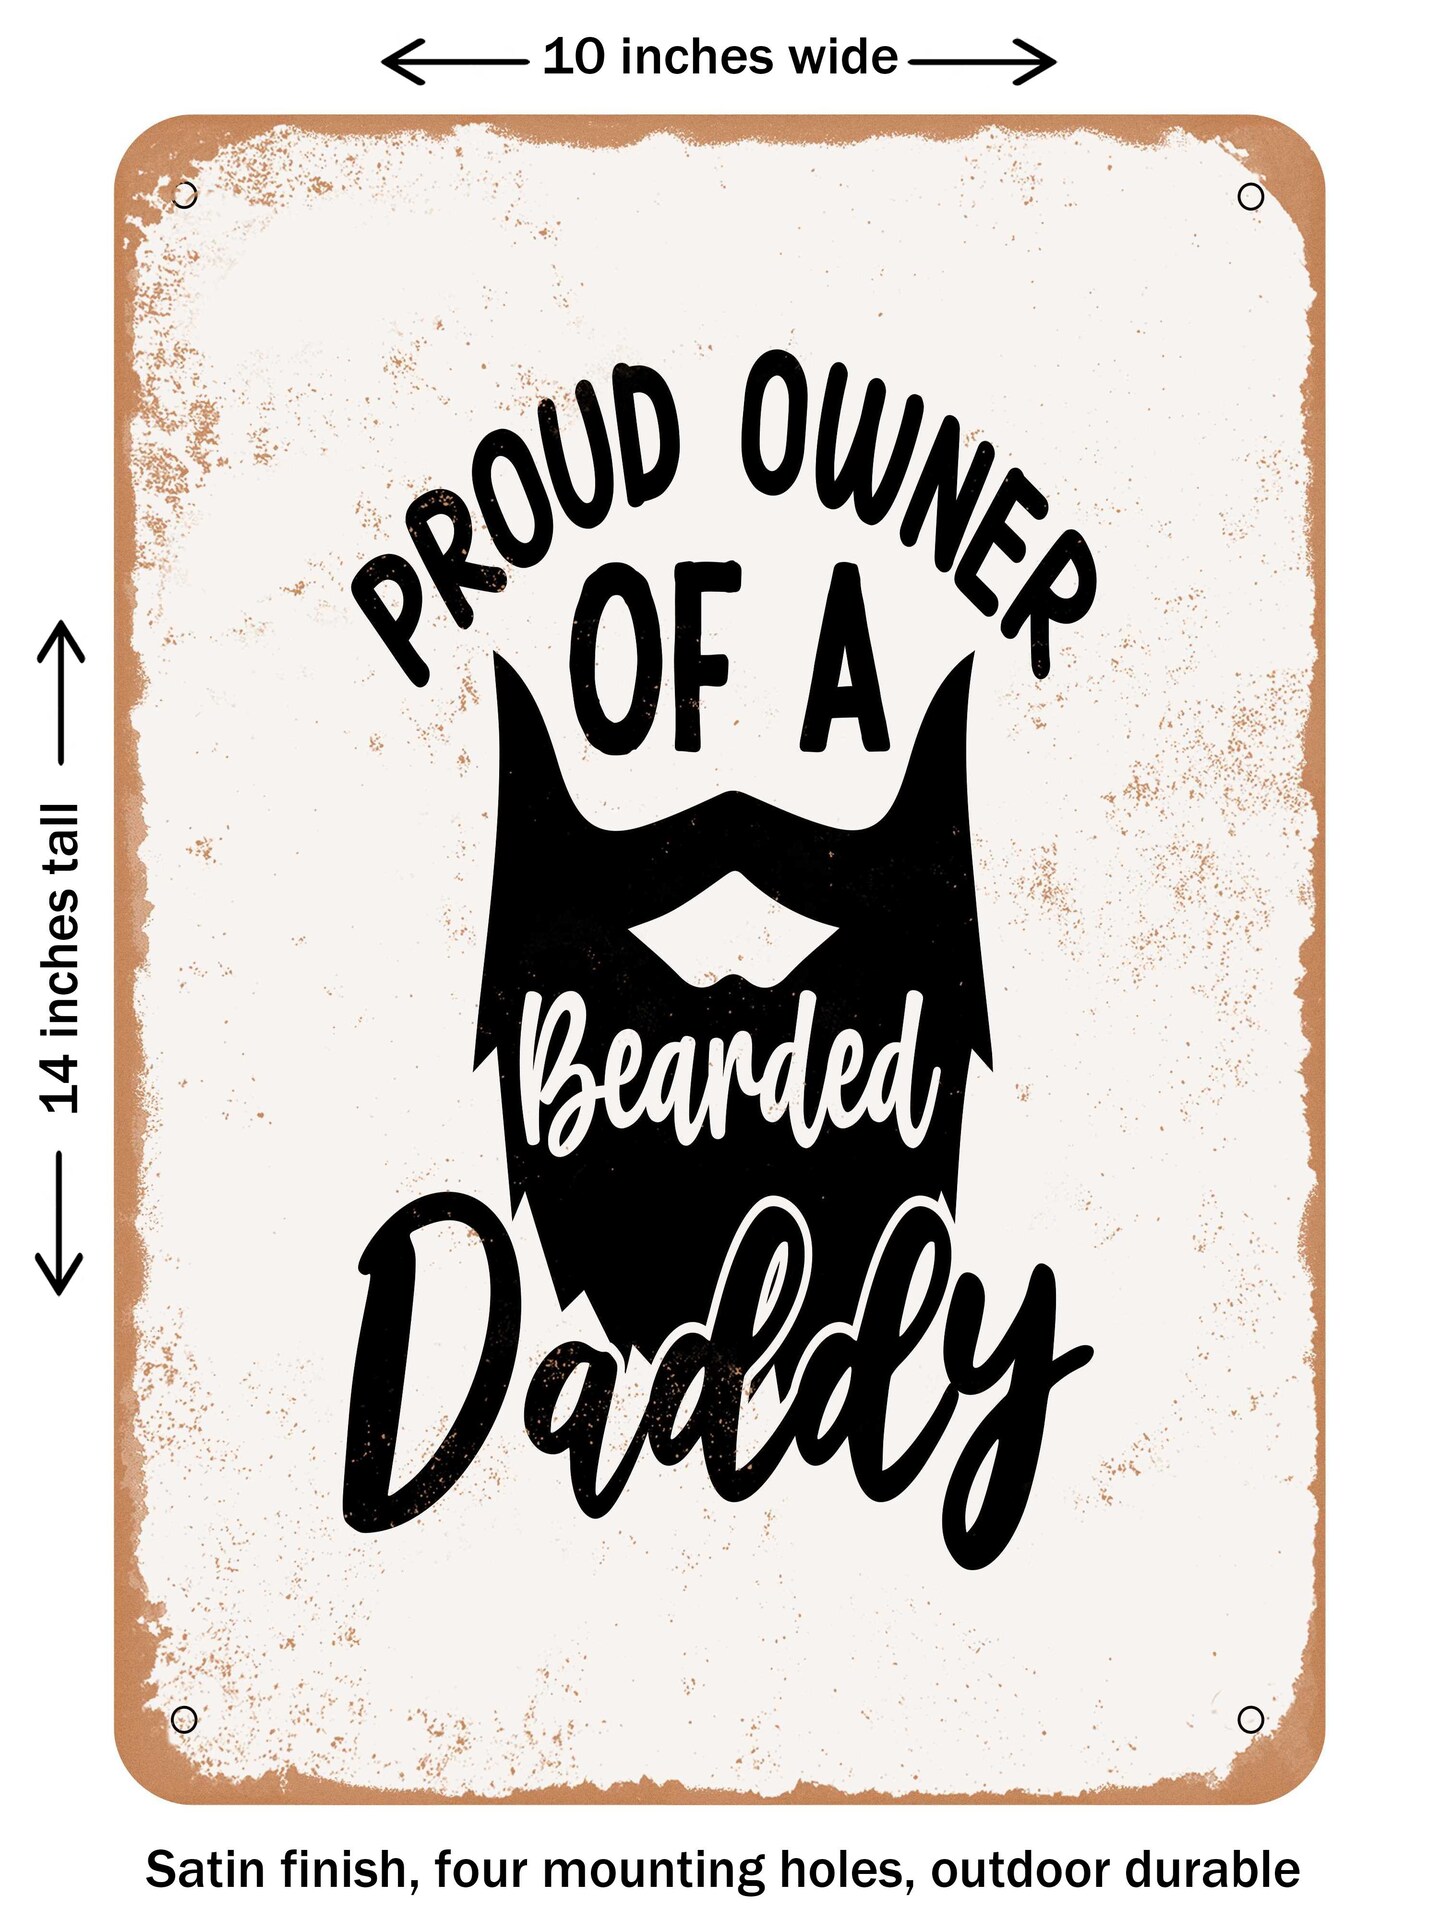 DECORATIVE METAL SIGN - Proud Owner of a Bearded Daddy - 3  - Vintage Rusty Look